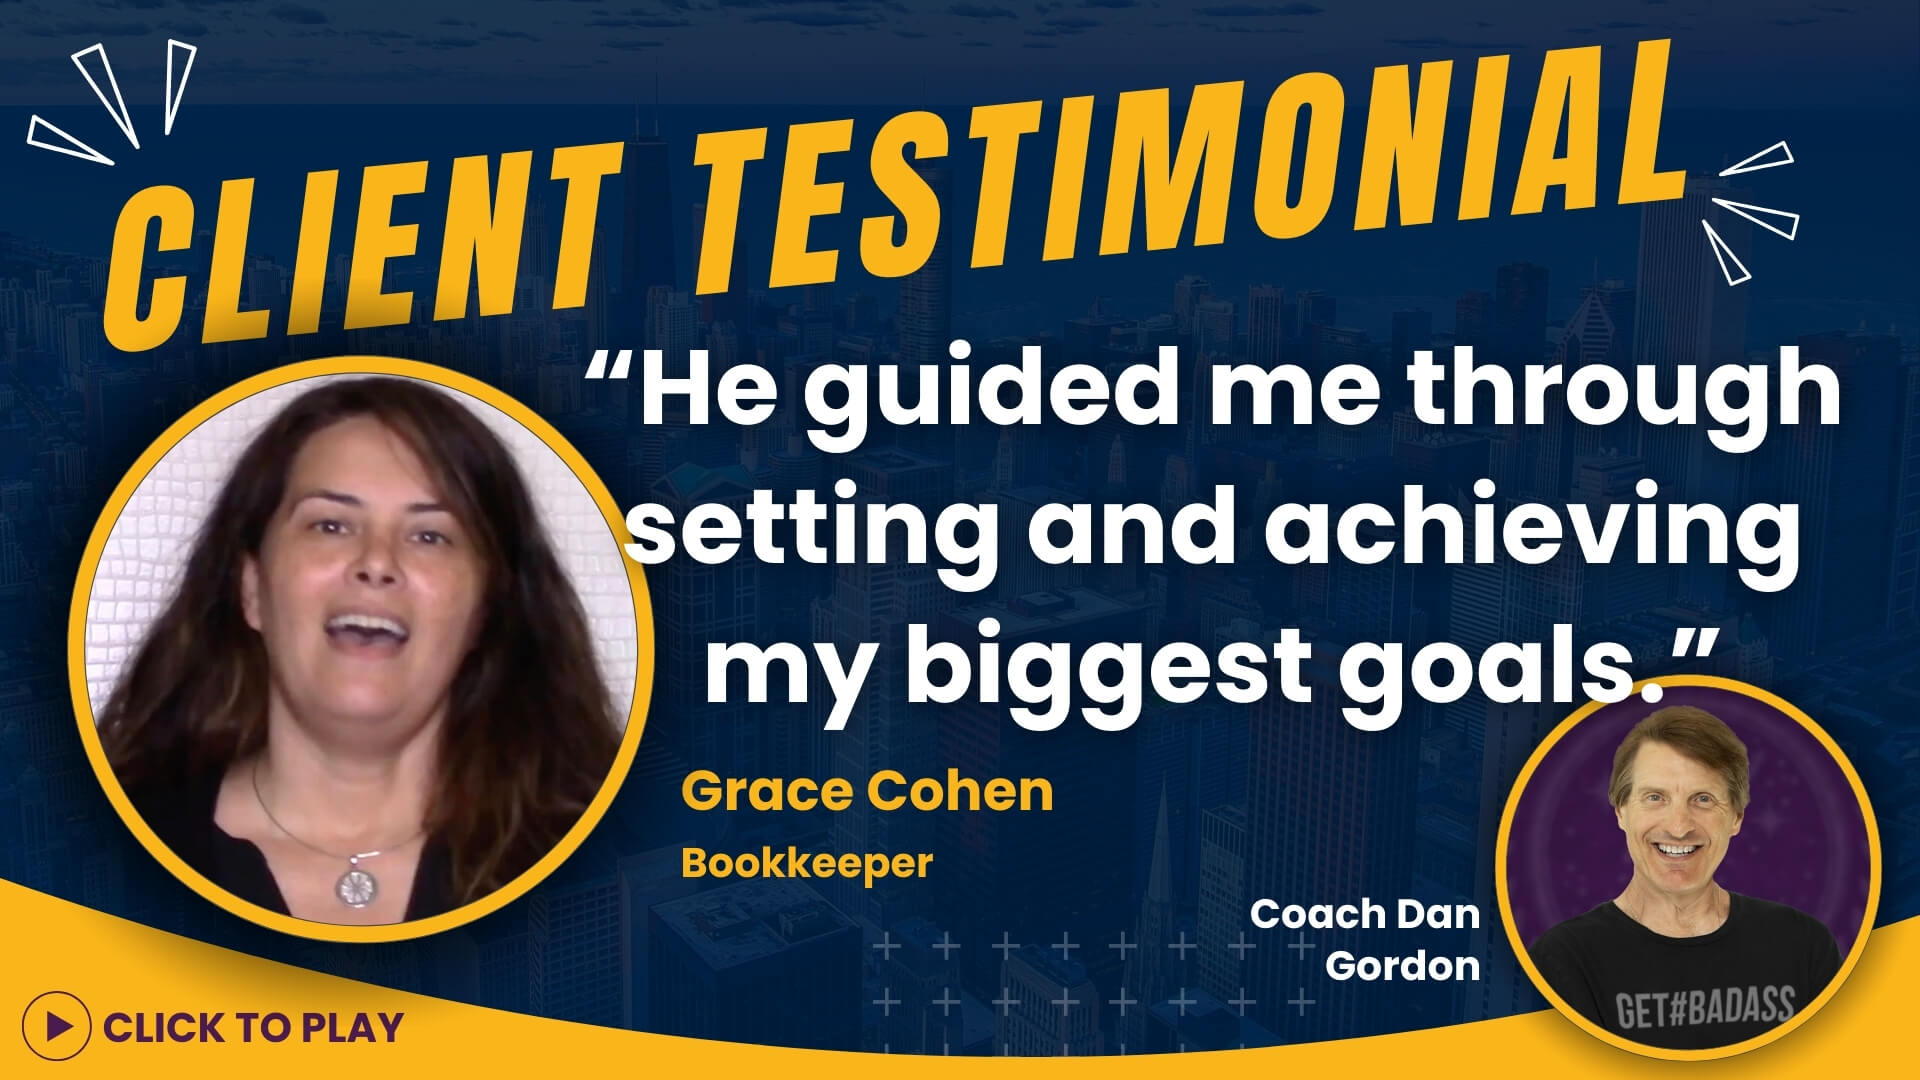 Grace Cohen, a bookkeeper, expresses in her testimonial how Coach Dan Gordon guided her in setting and achieving her biggest goals, including a 'Click to Play' video option.